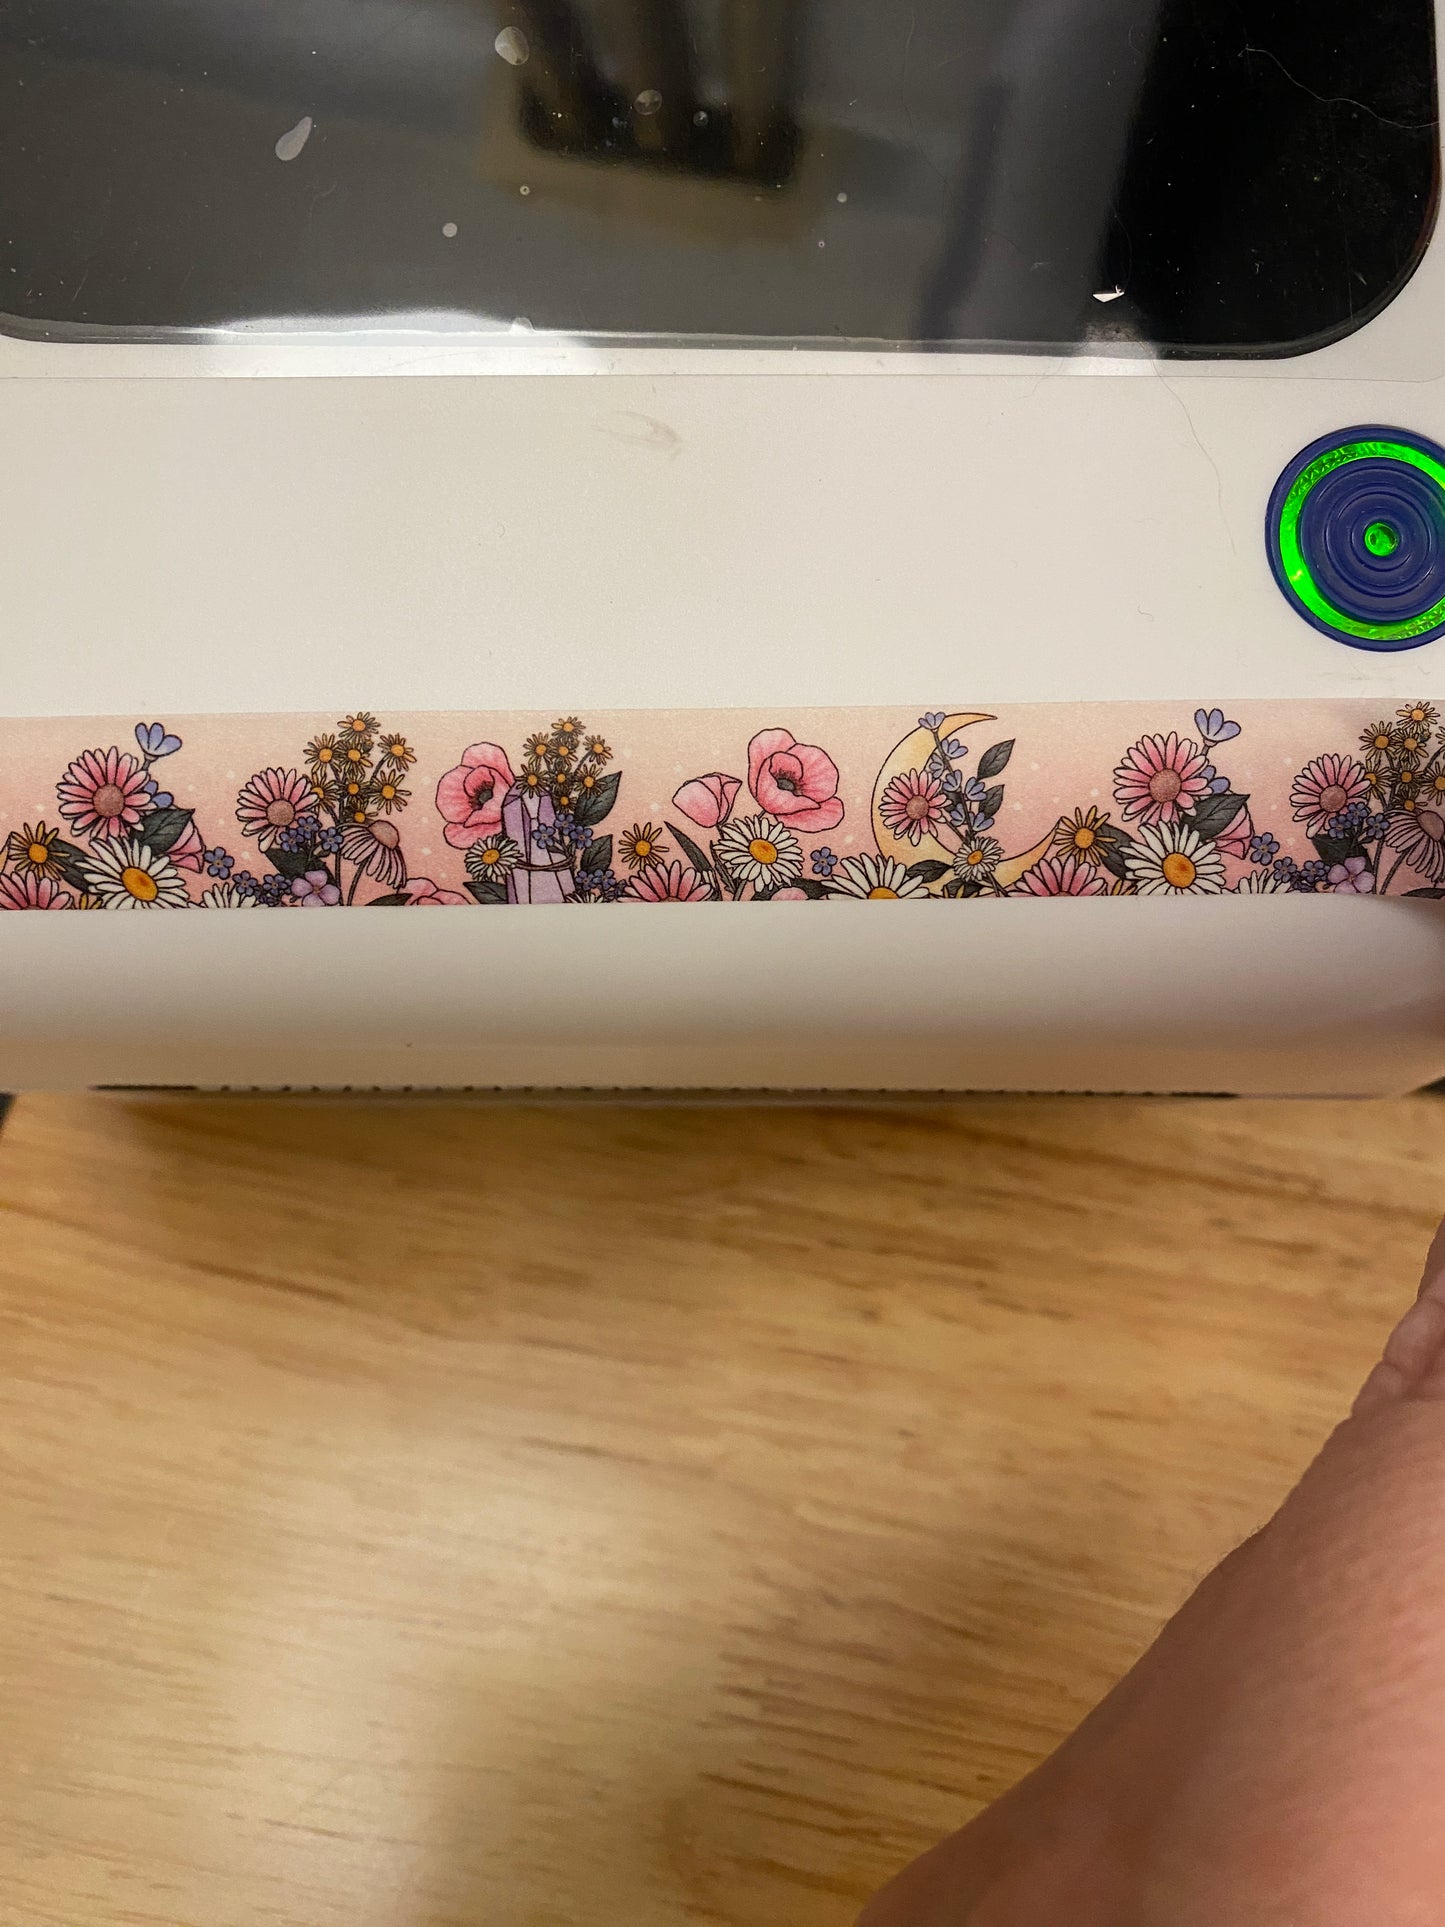 Big Roll of Pink Floral with Moon Washi Tape, Flower Washi Tape roll, Adhesive Masking Tapes, Pretty Flower Washi tape, Moon Flowers tape